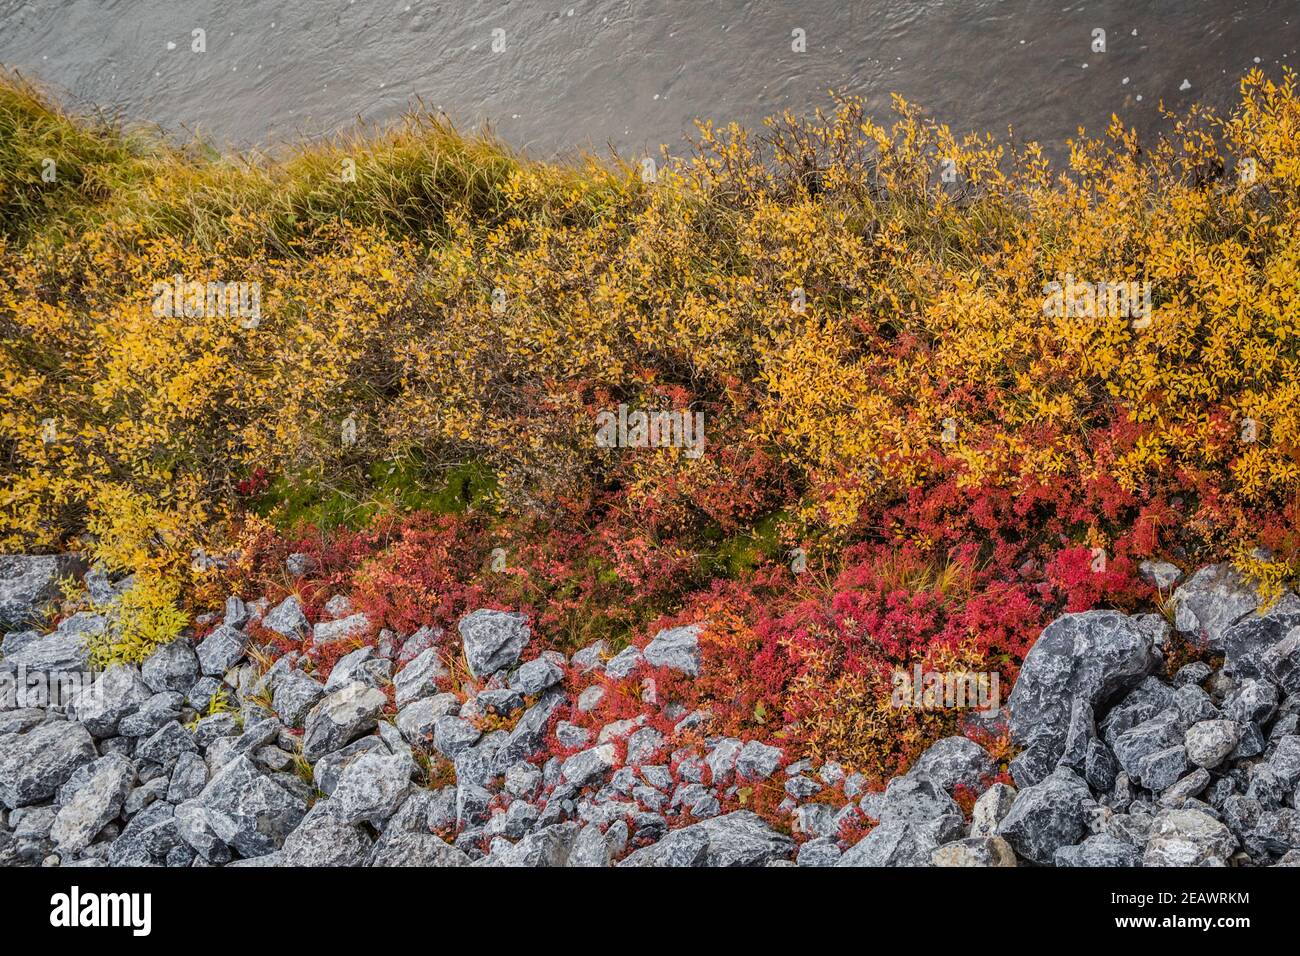 Colourful vegetation in the Canadian arctic, along the Inuvik-Tuktoyaktuk Highway in the fall, Northwest Territories, Canada's western Arctic. Stock Photo